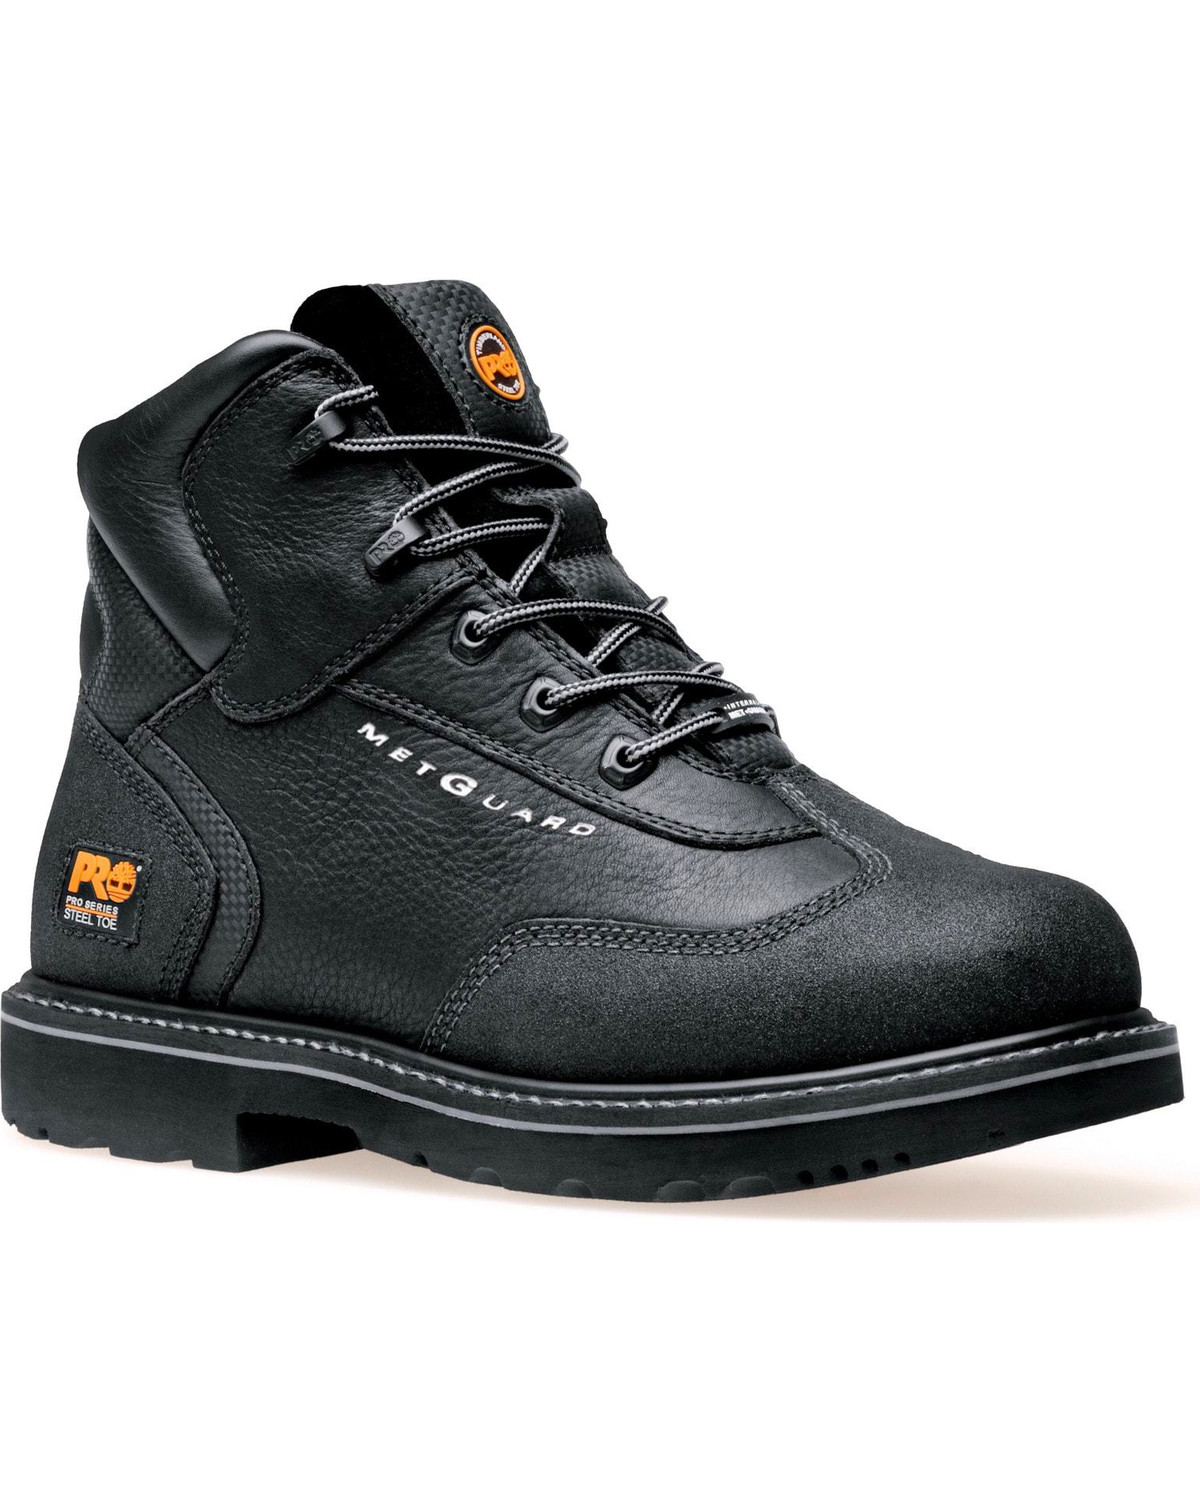 mens steel toe boots with metatarsal guard